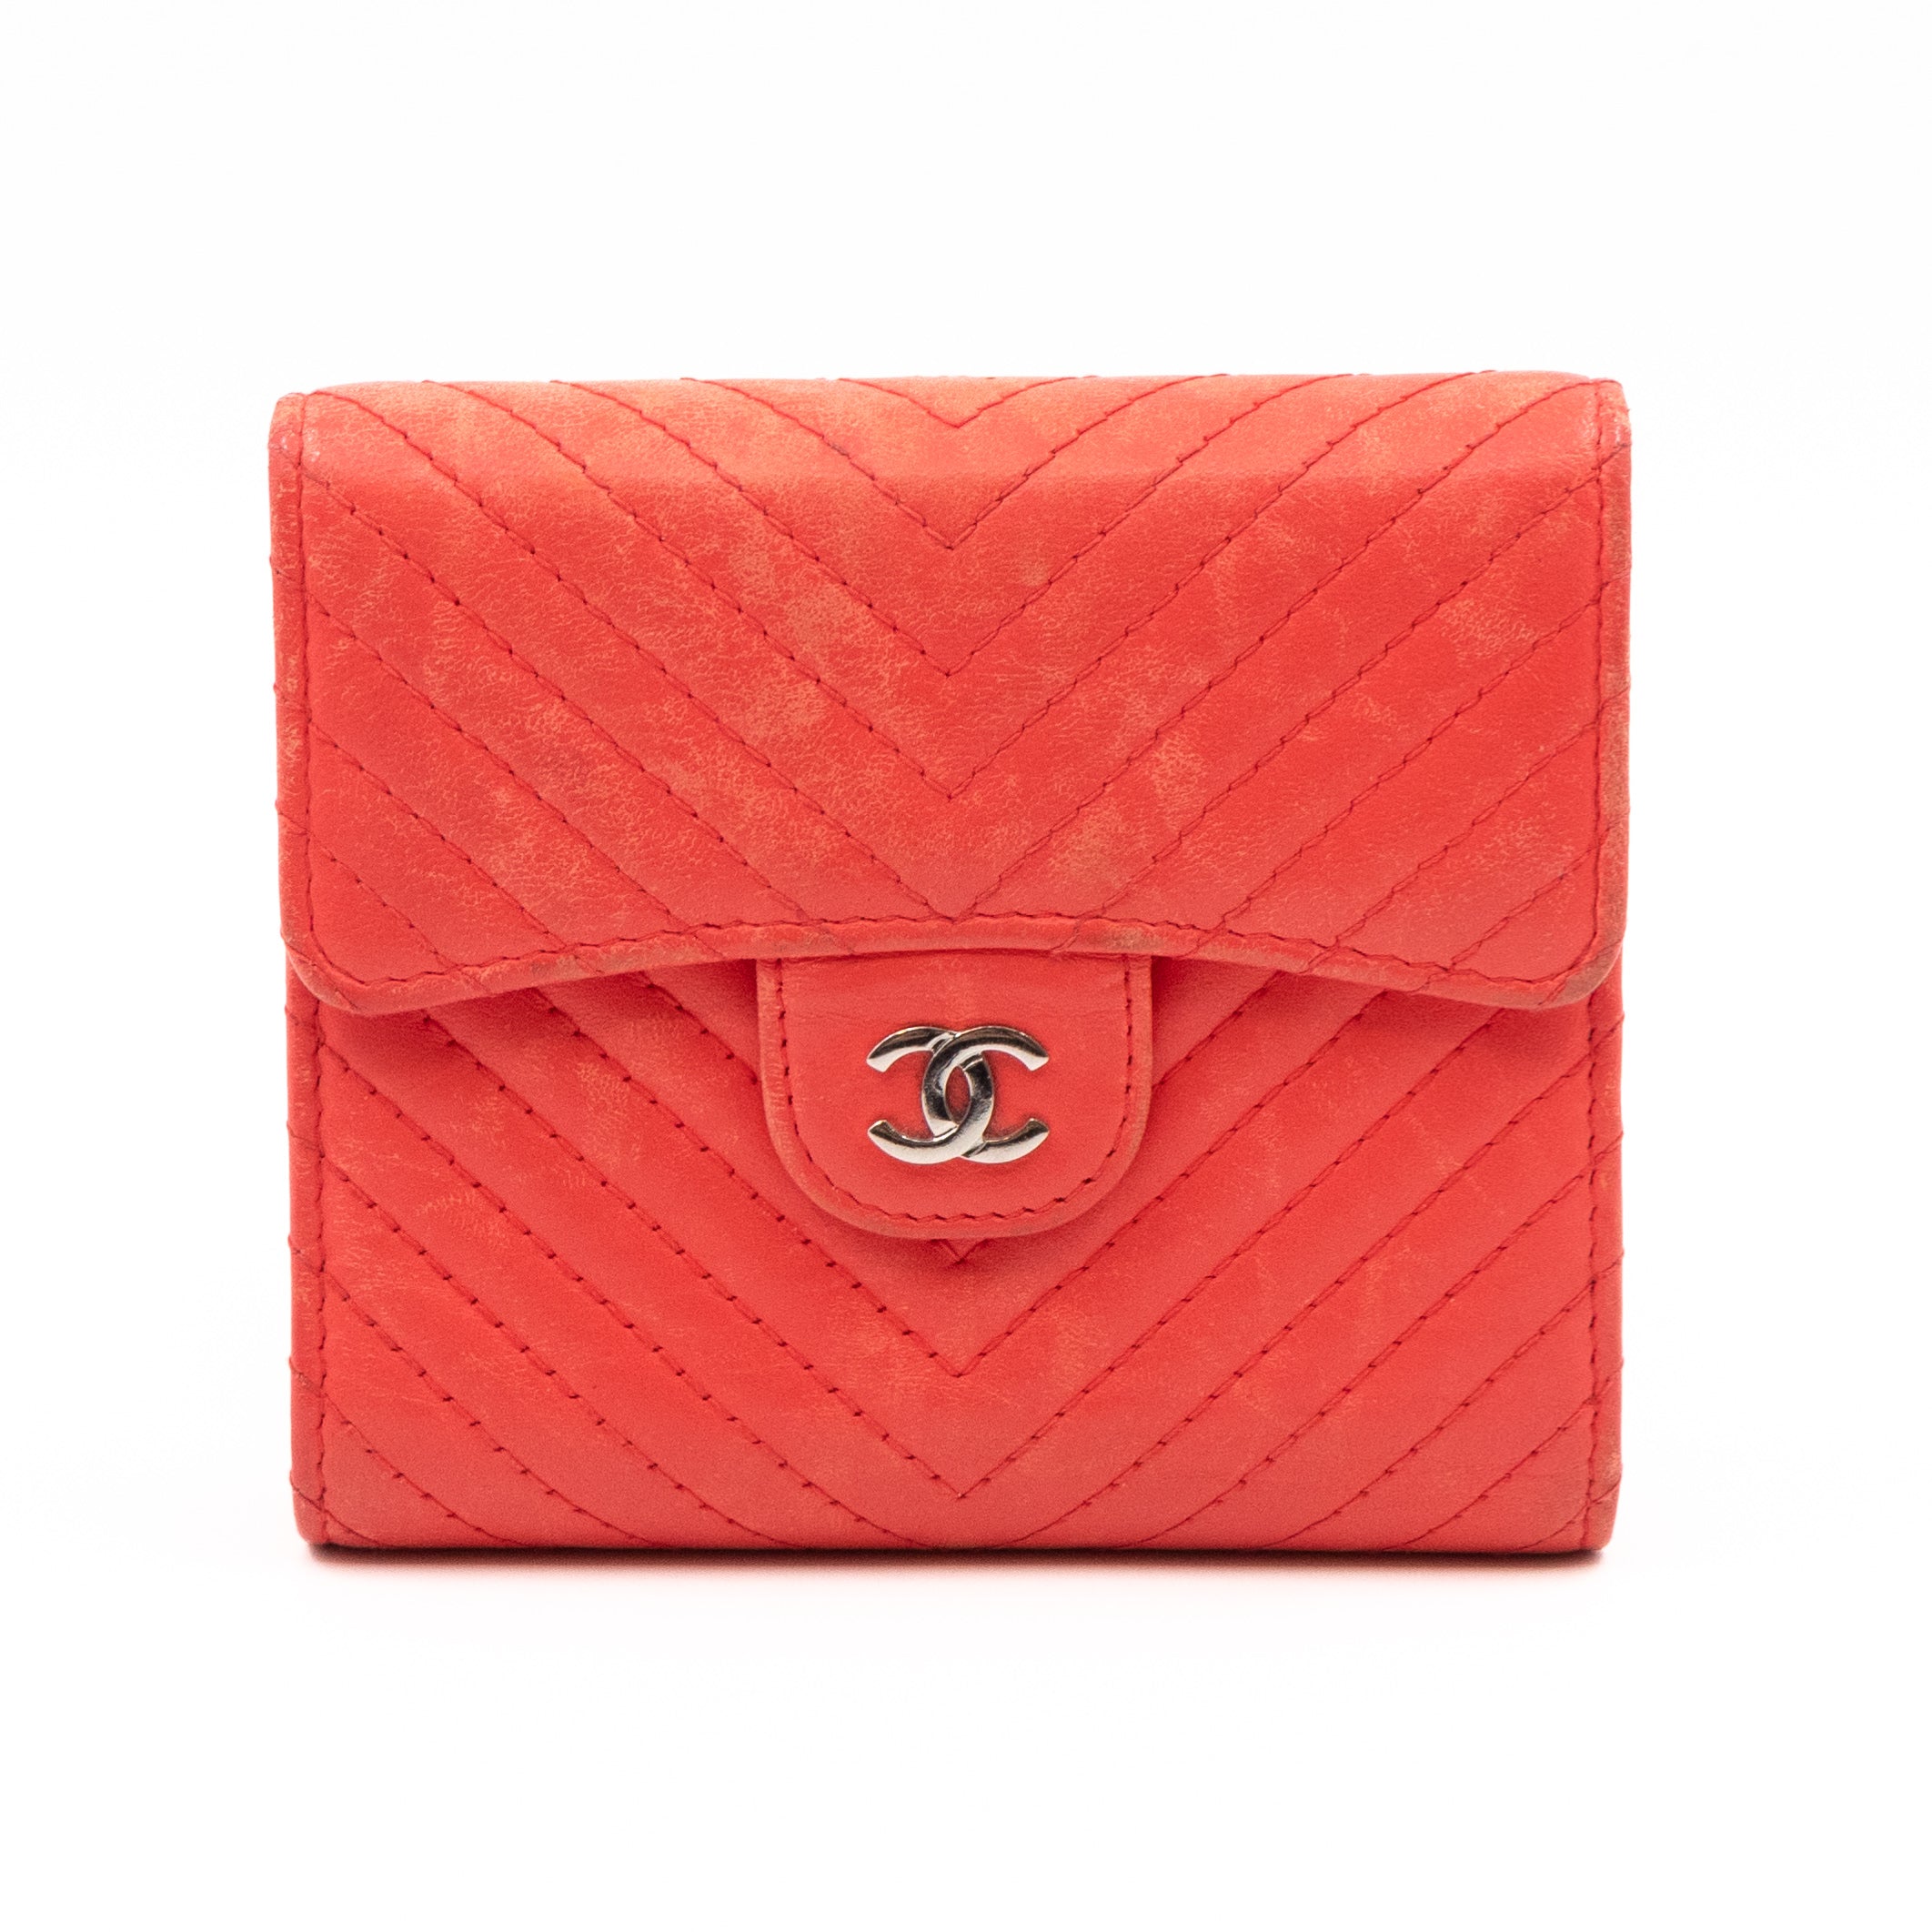 Lambskin  GoldTone Metal Pink Classic Card Holder  CHANEL  Chanel card  holder Prom clutch bags Card wallet